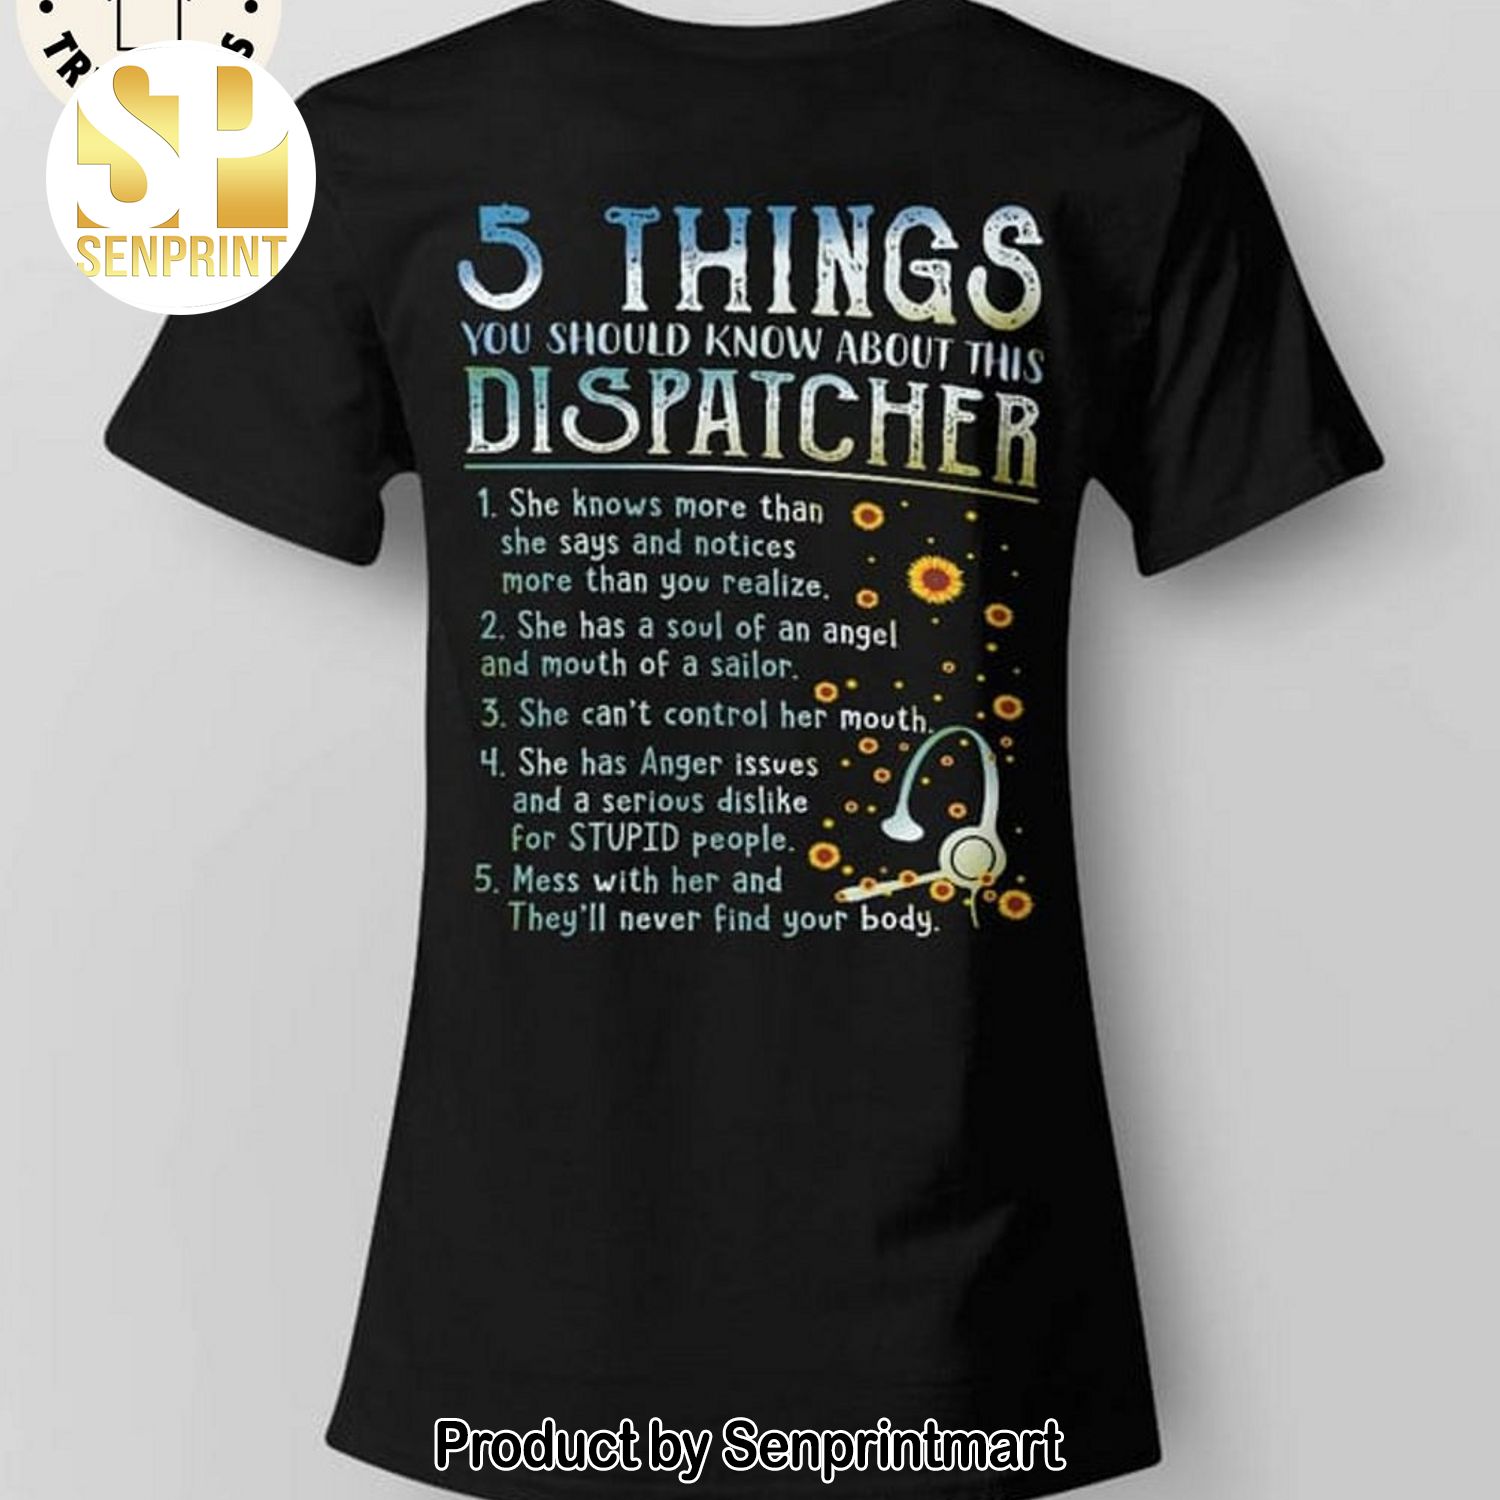 5 Things You Should Know About This Dispatcher Full Printed Shirt